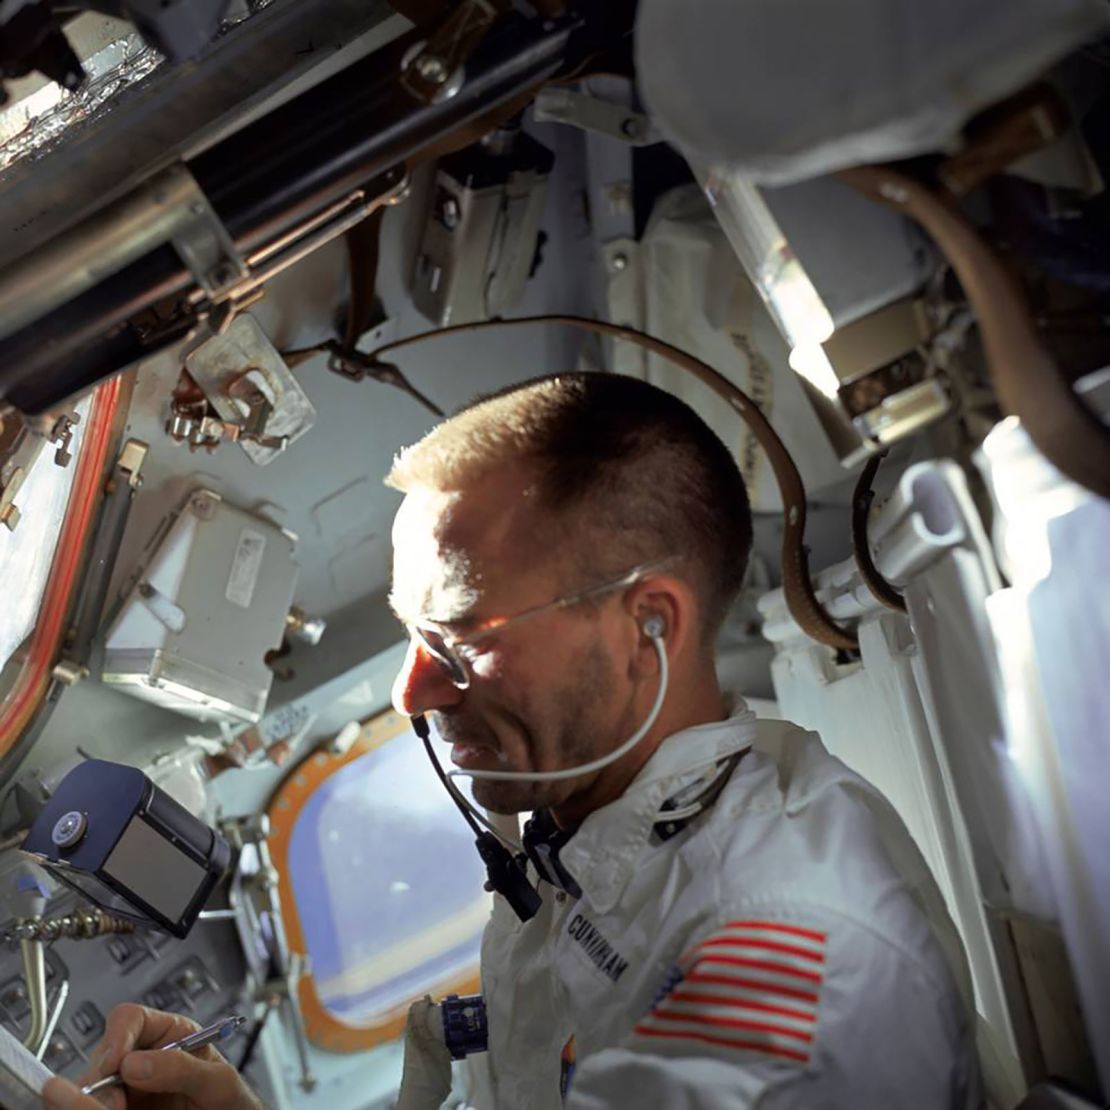 Cunningham writes with a Fisher Space Pen during the flight of Apollo 7, the first crewed Apollo flight and the Space Pen's first trip to space. The pens have been used on every NASA human spaceflight mission since.